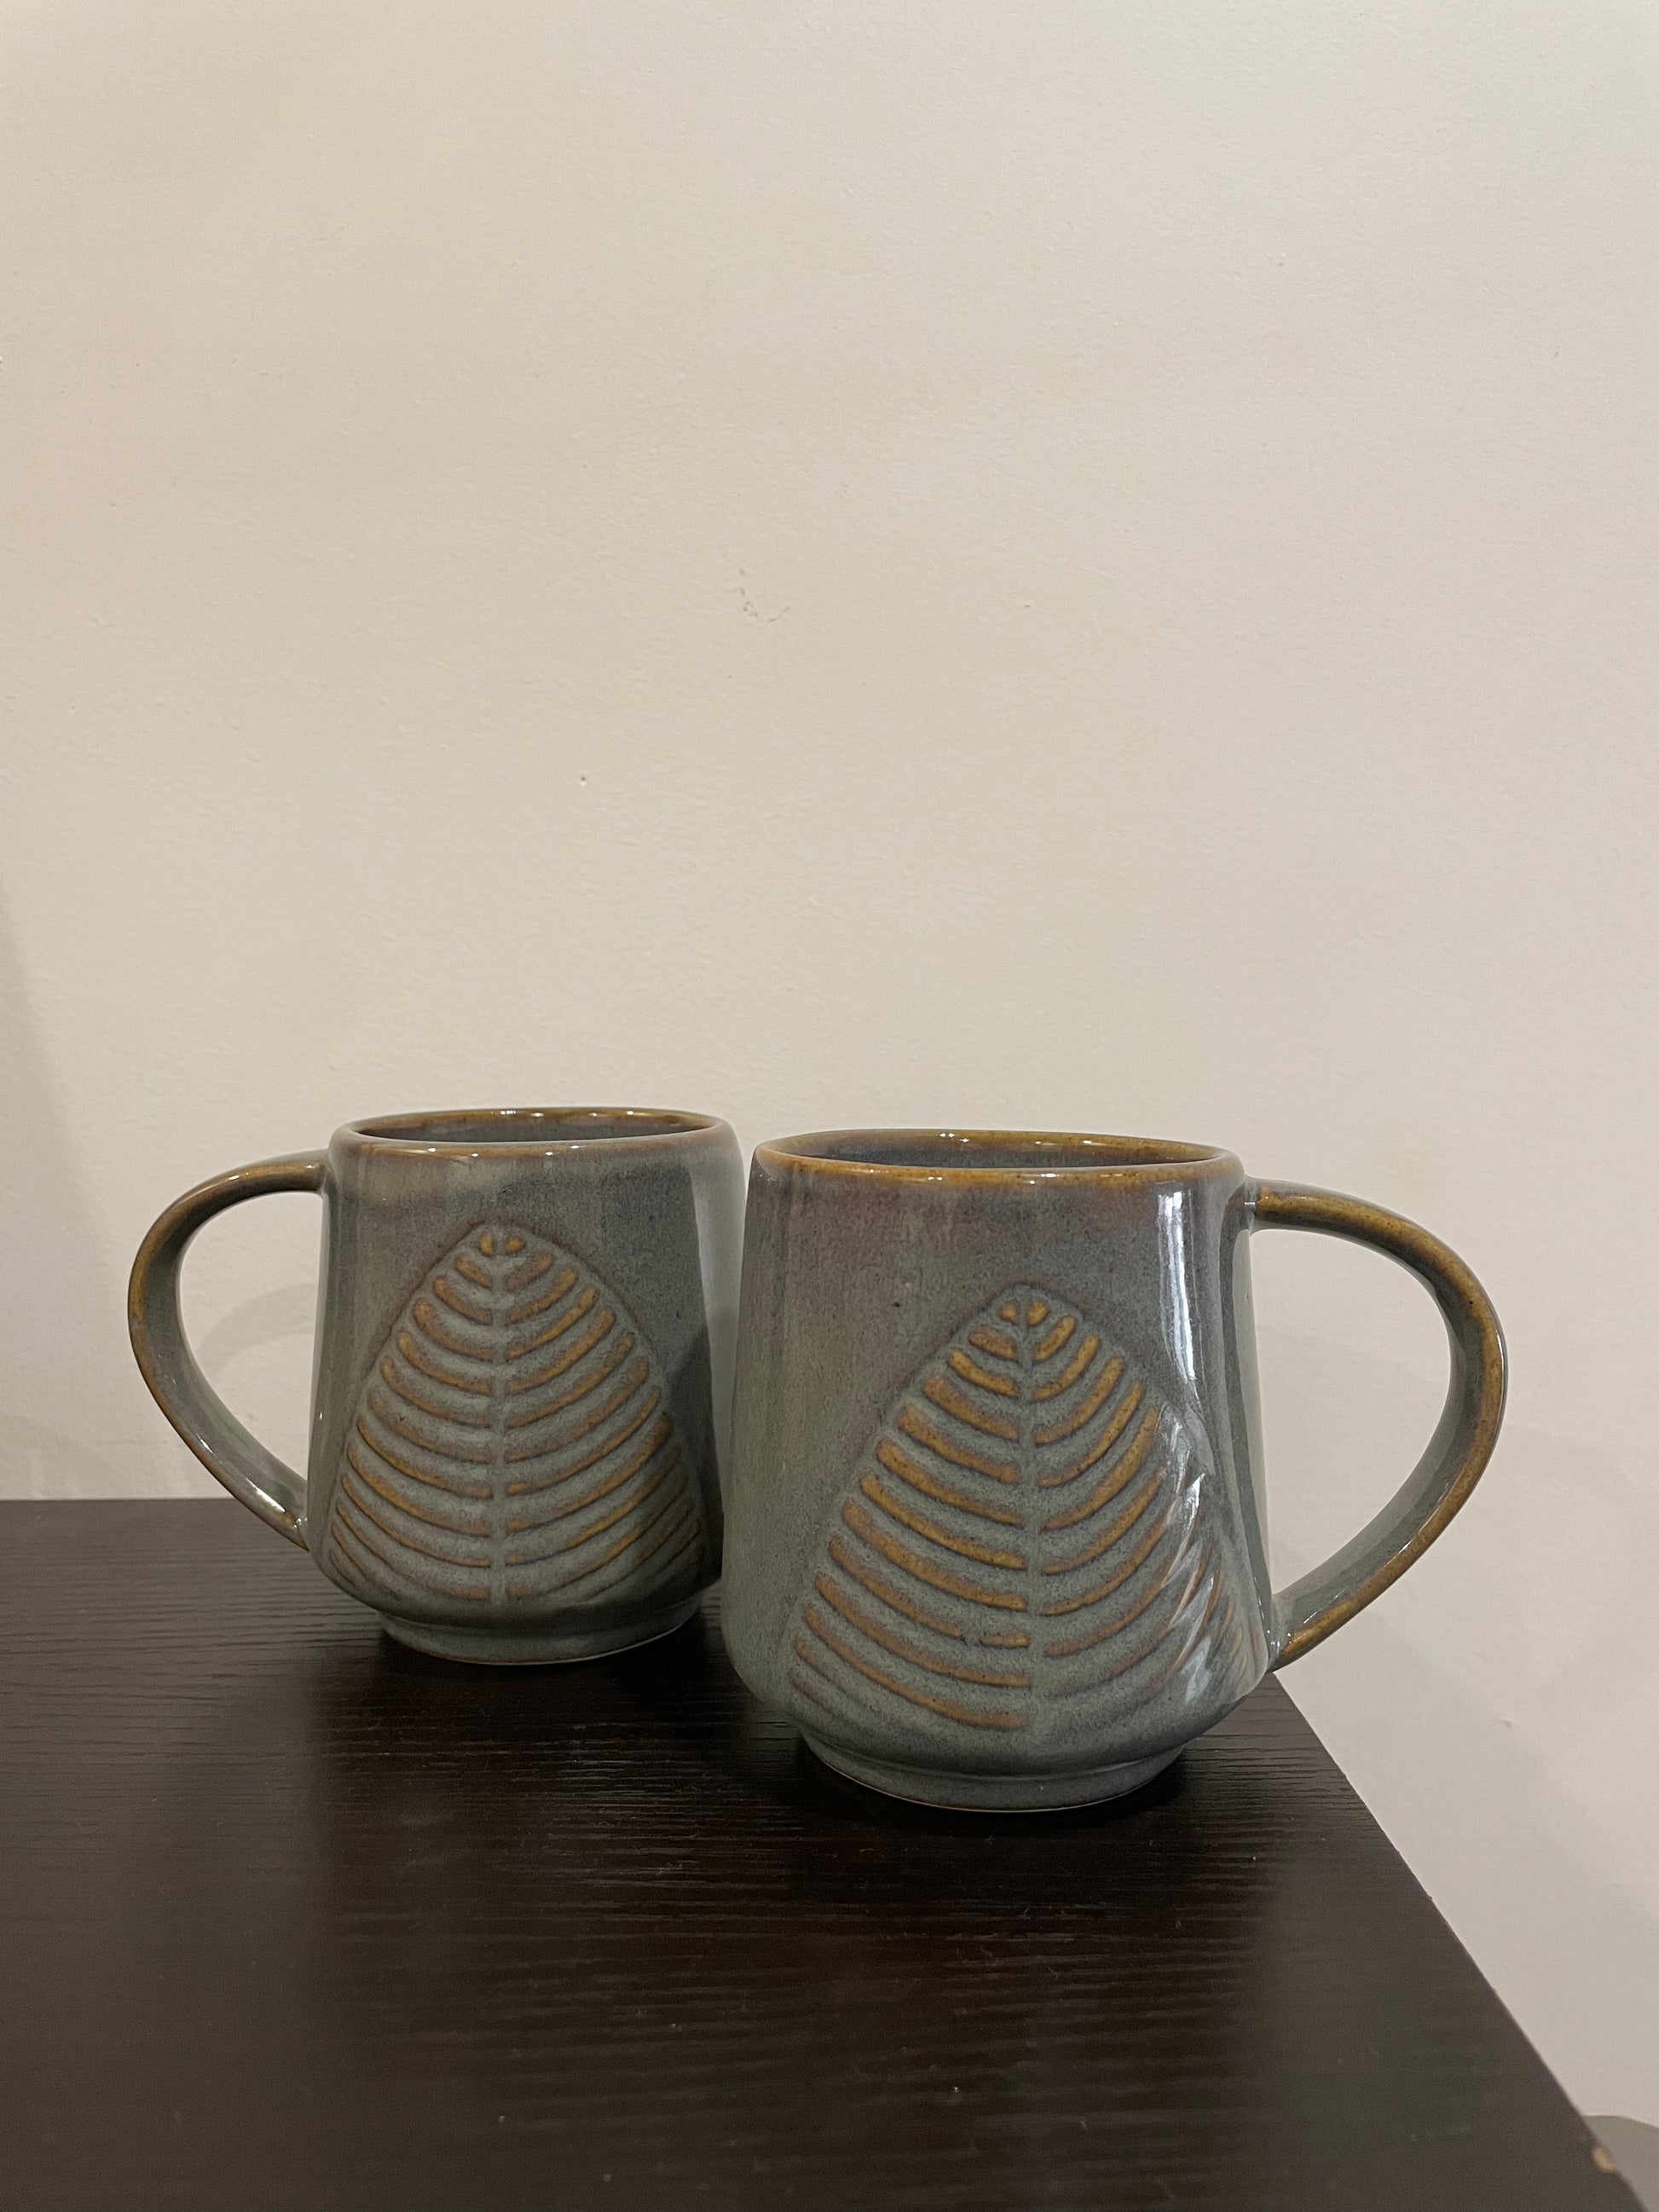 A pair of greyish-green big mugs with tonal leaf motif, wide handle for easy use, on table. Buy affordable ceramics in India.